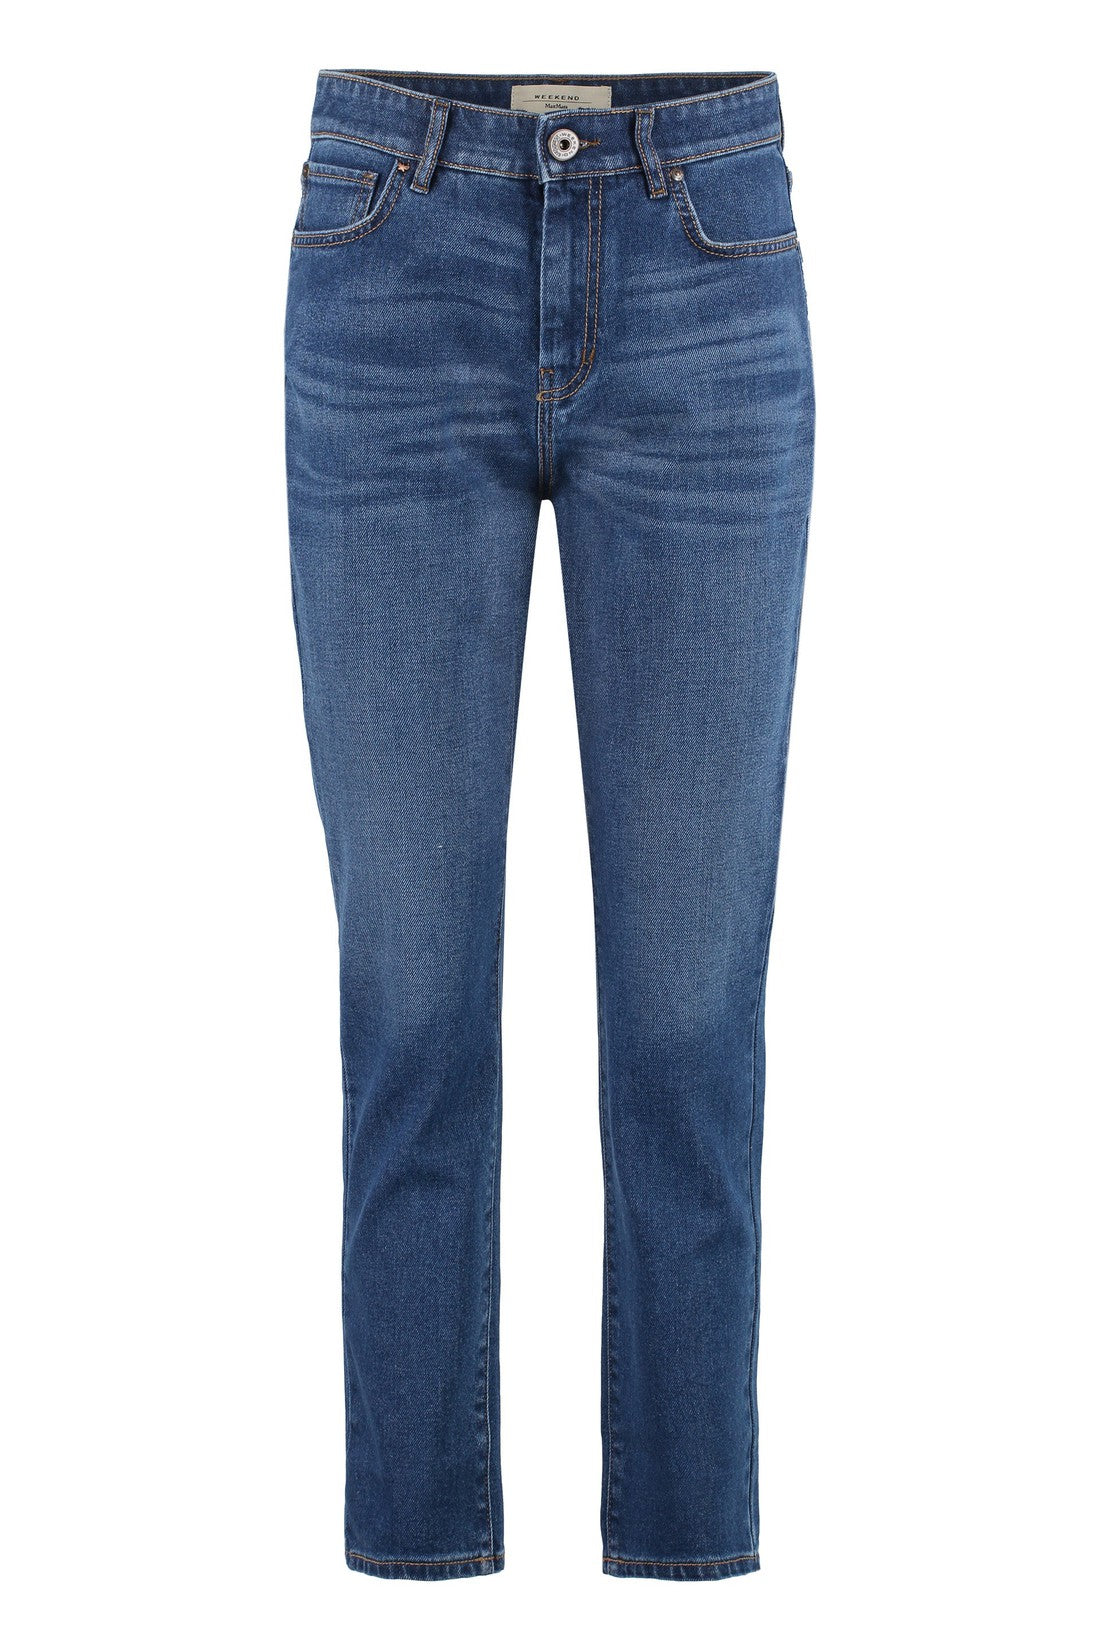 Weekend Max Mara-OUTLET-SALE-Eufrate cigarette jeans-ARCHIVIST